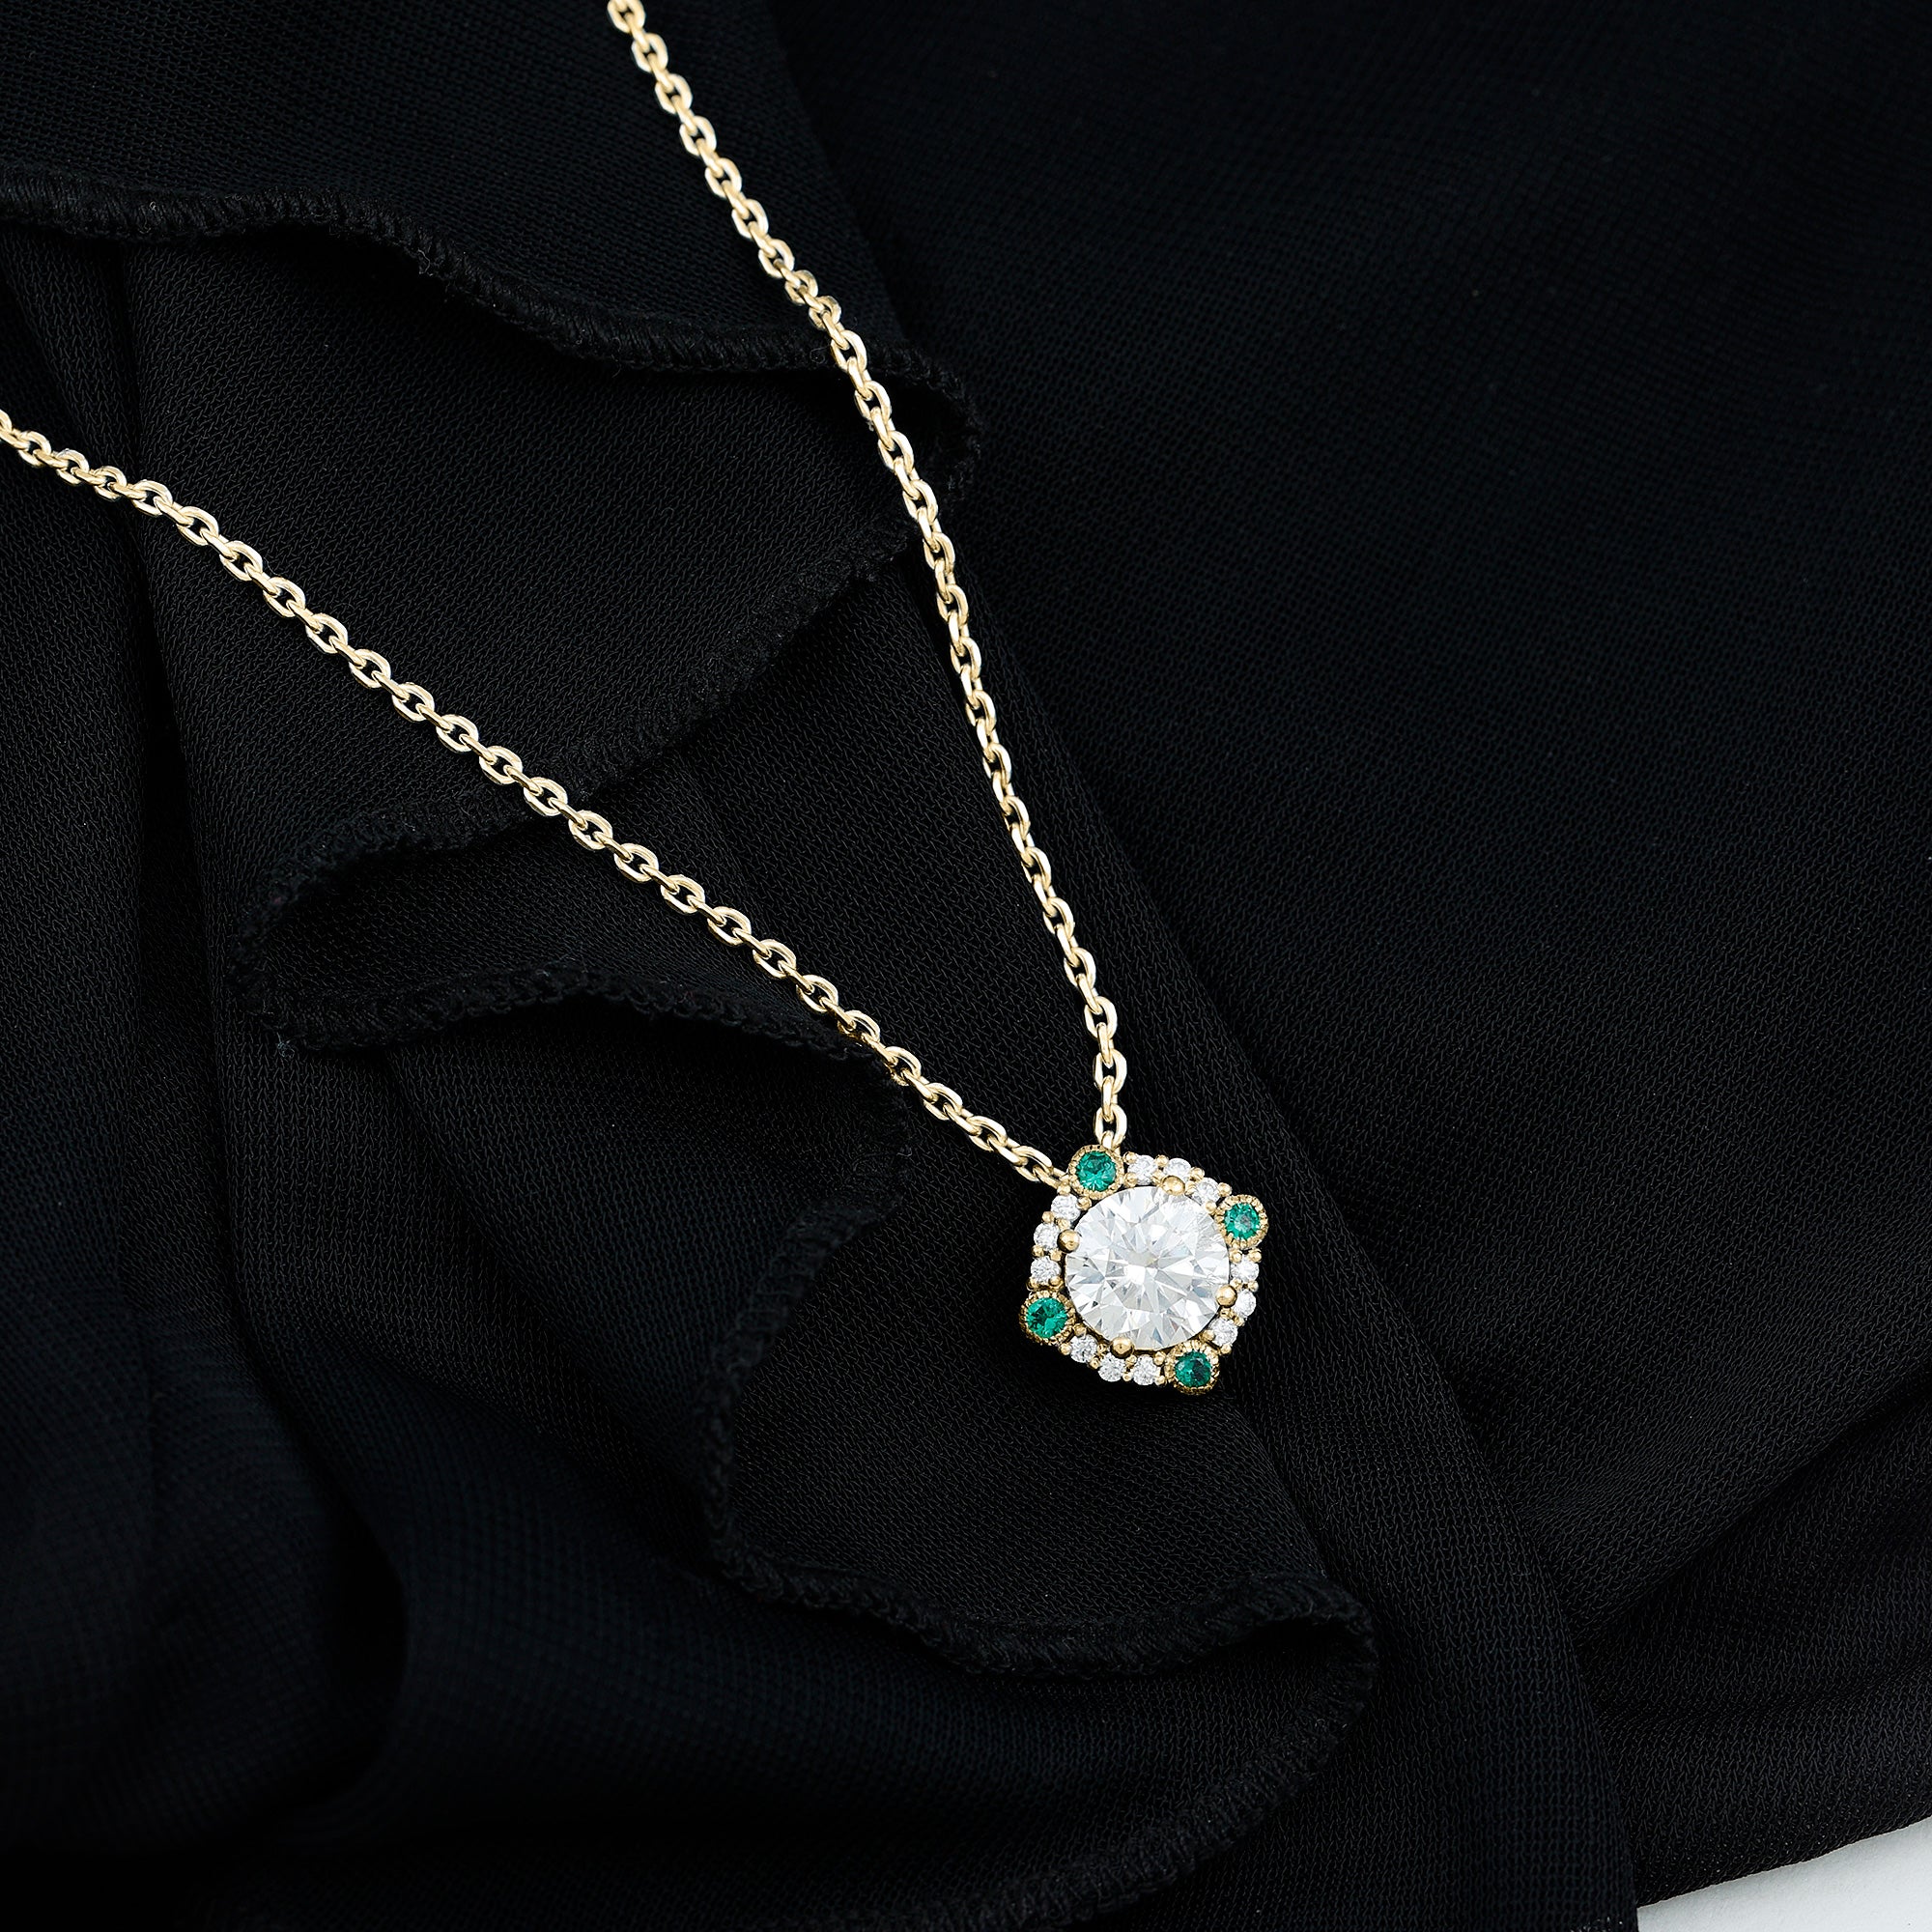 Sparkanite Jewels-Vintage Inspired Pendant with Moissanite and Lab Grown Emerald